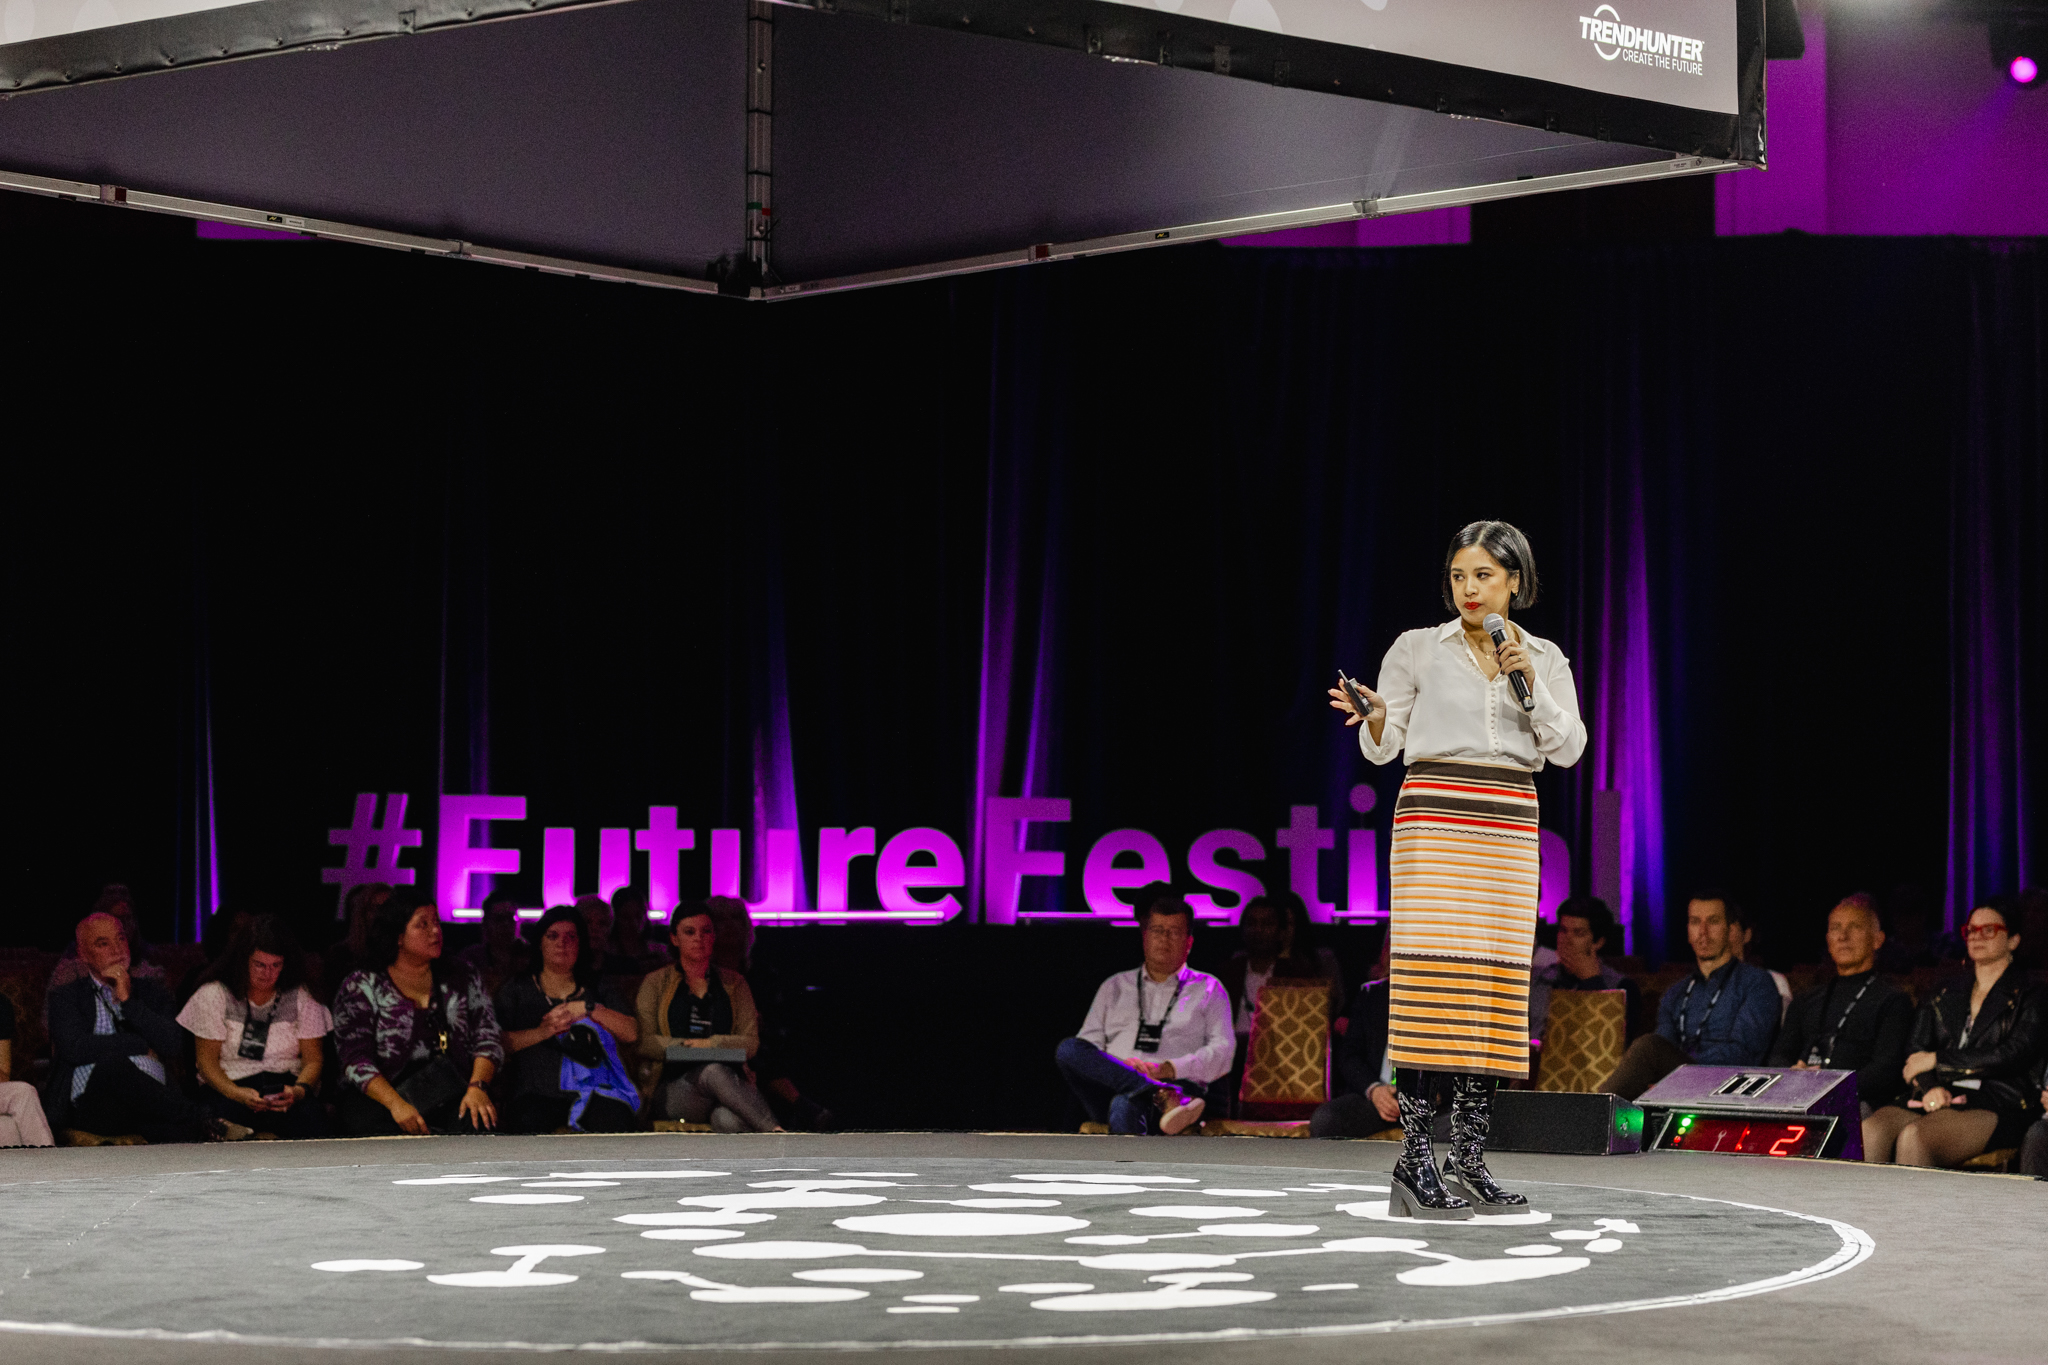 A woman speaking on stage at a future fest event, captured through event photography.